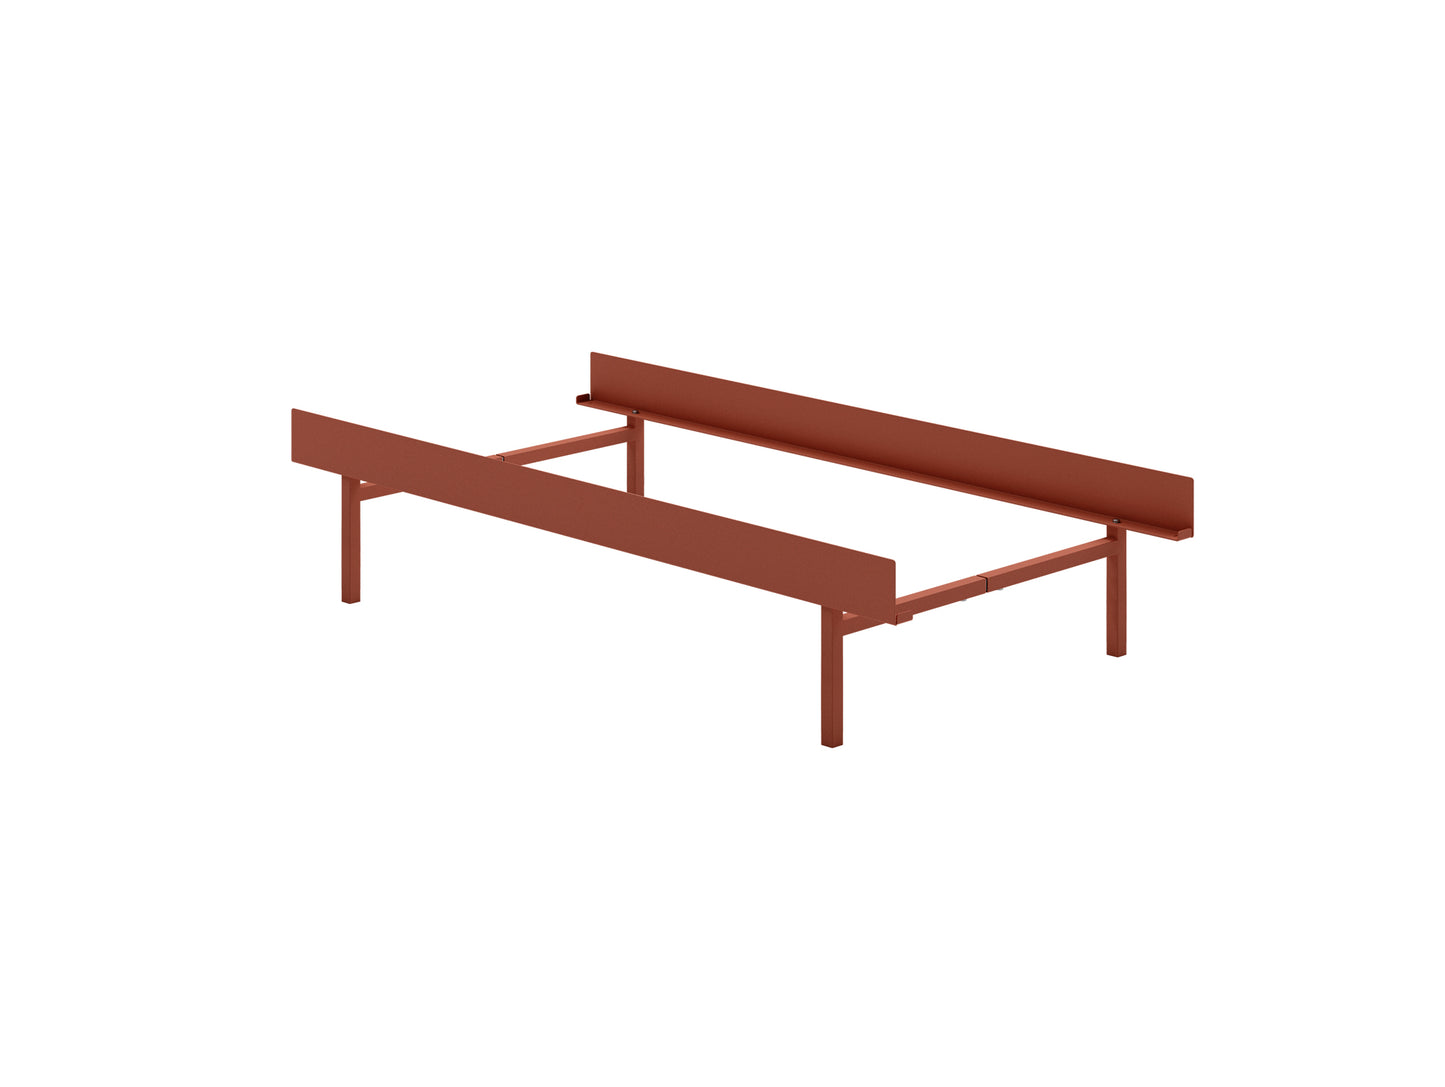 Bed 90 - 180 cm (High) by Moebe- Bed Frame / with NO SLATS / Terracotta